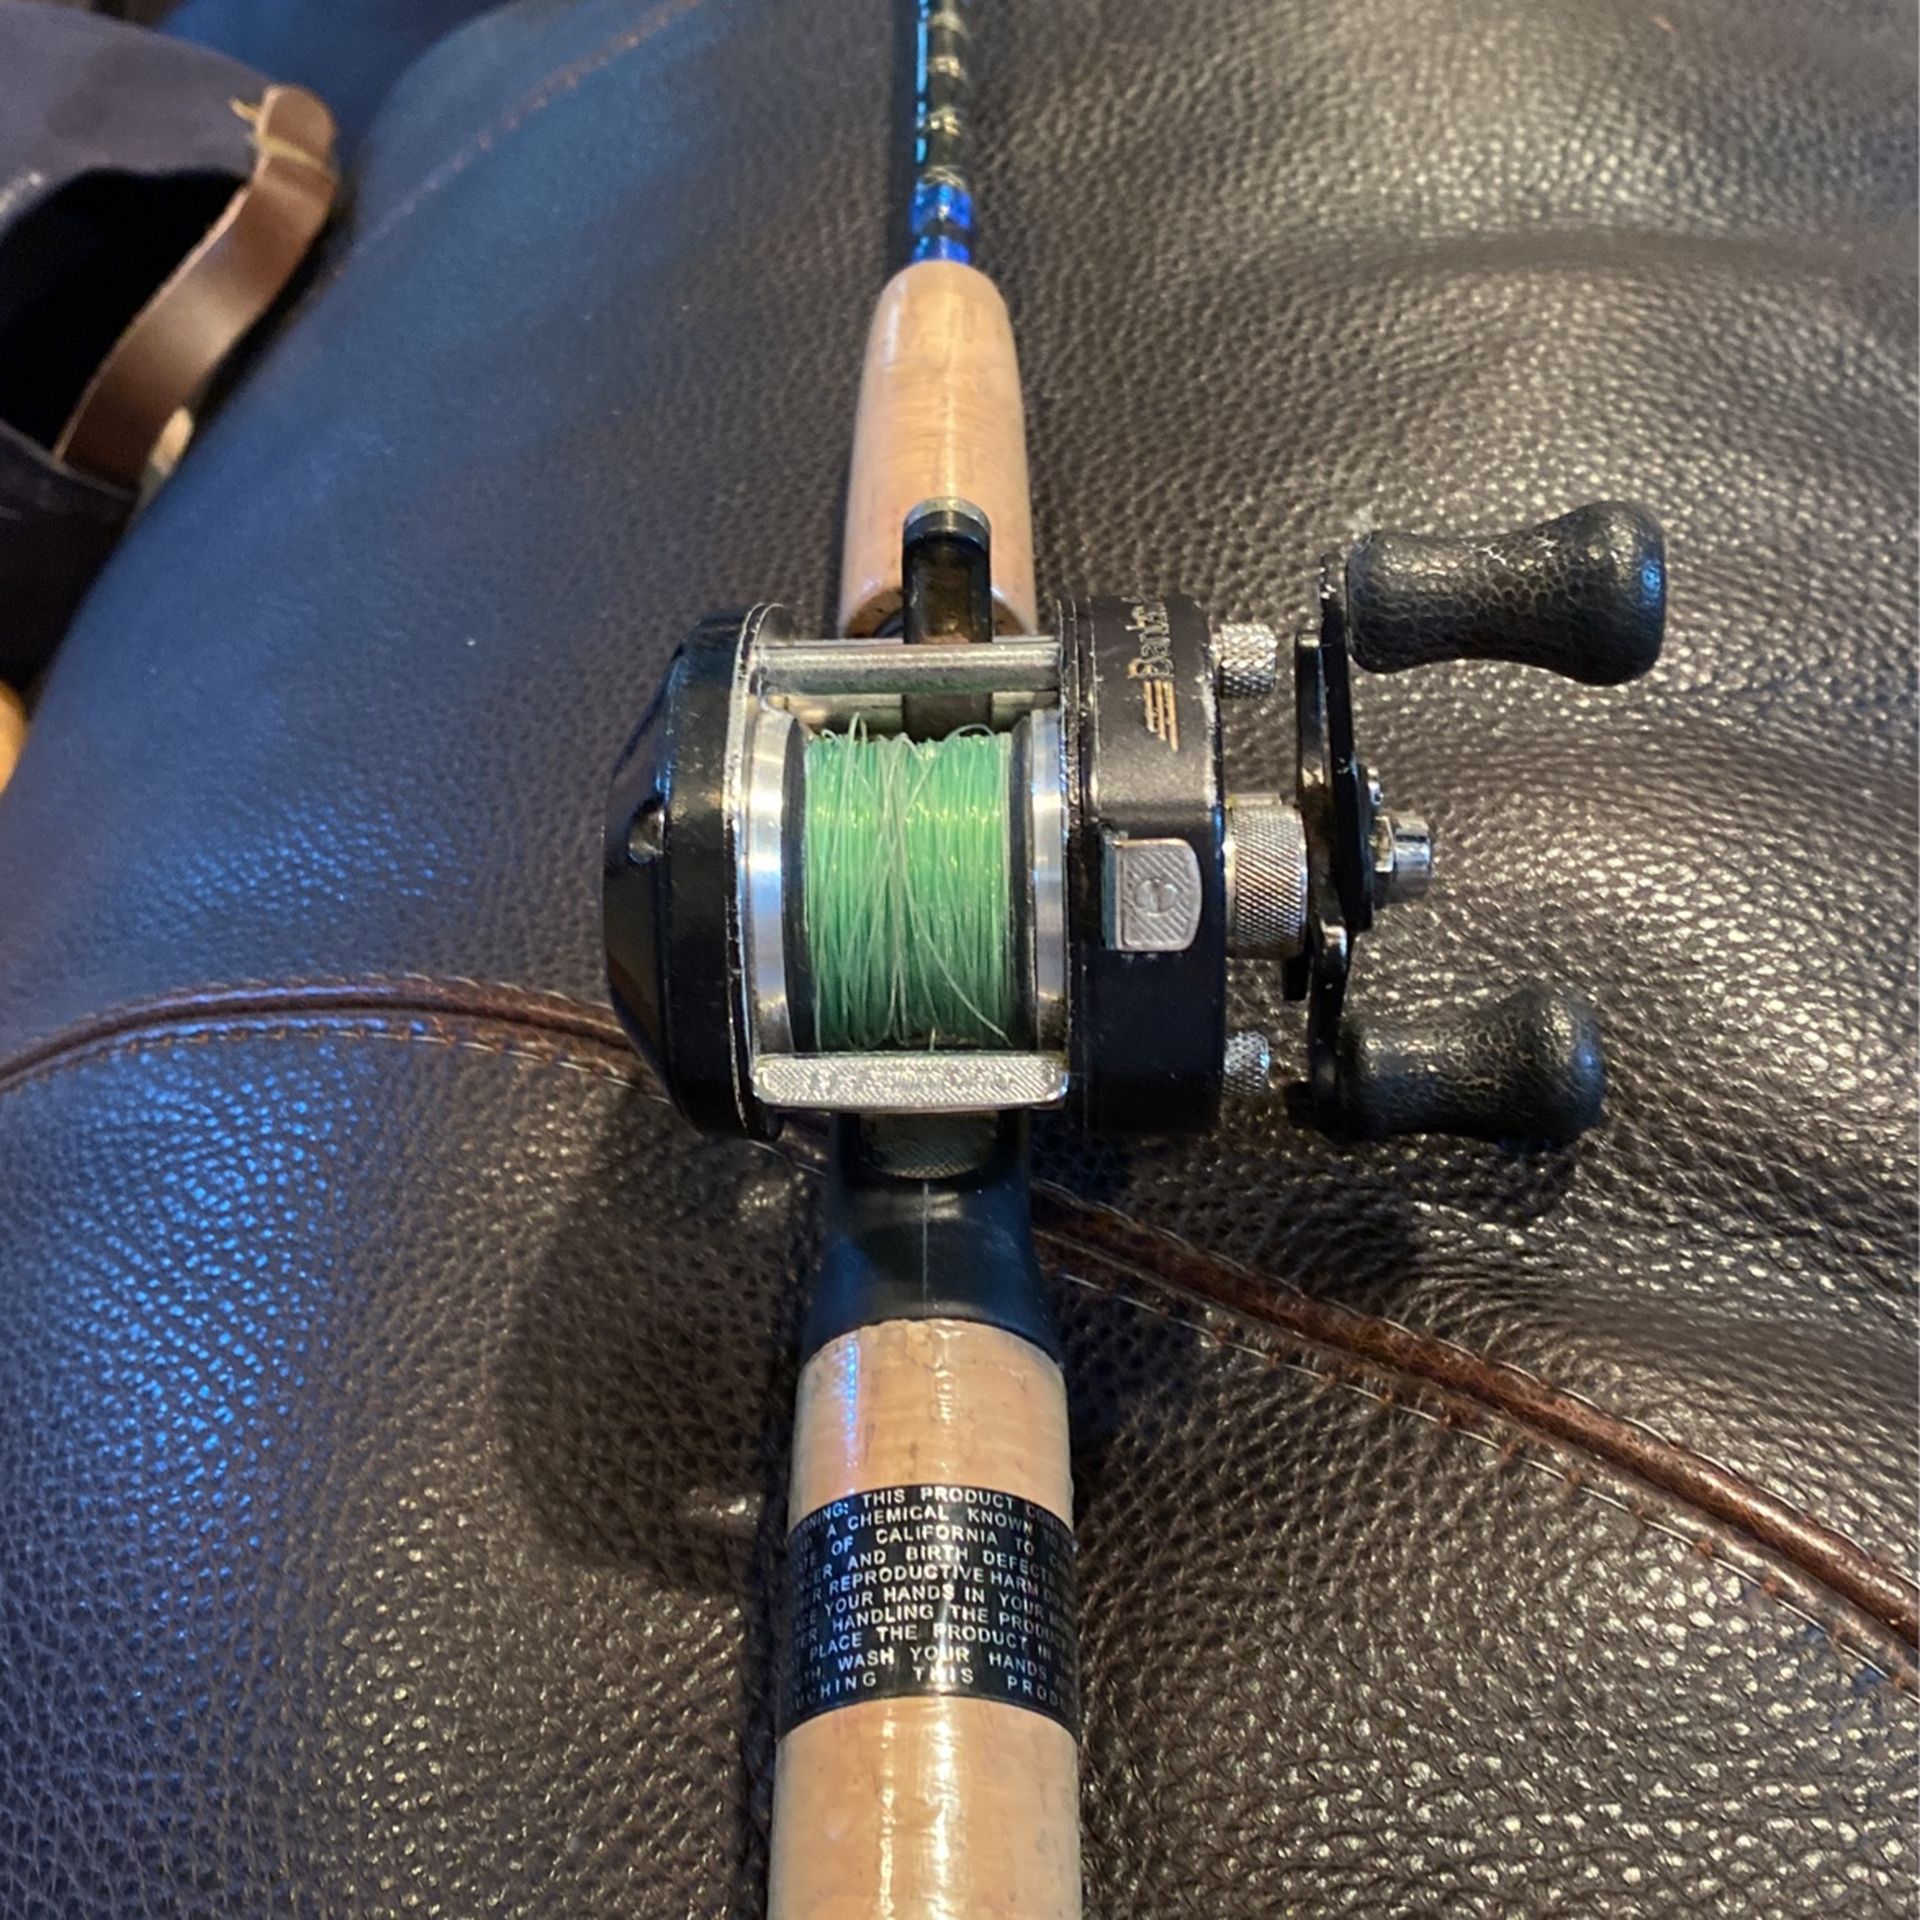 Shimano Bantam Mag 10X Reel On 7’ Graphite Rod  Set Up Ready To Fish   Very Smooth!  $85 Firm   